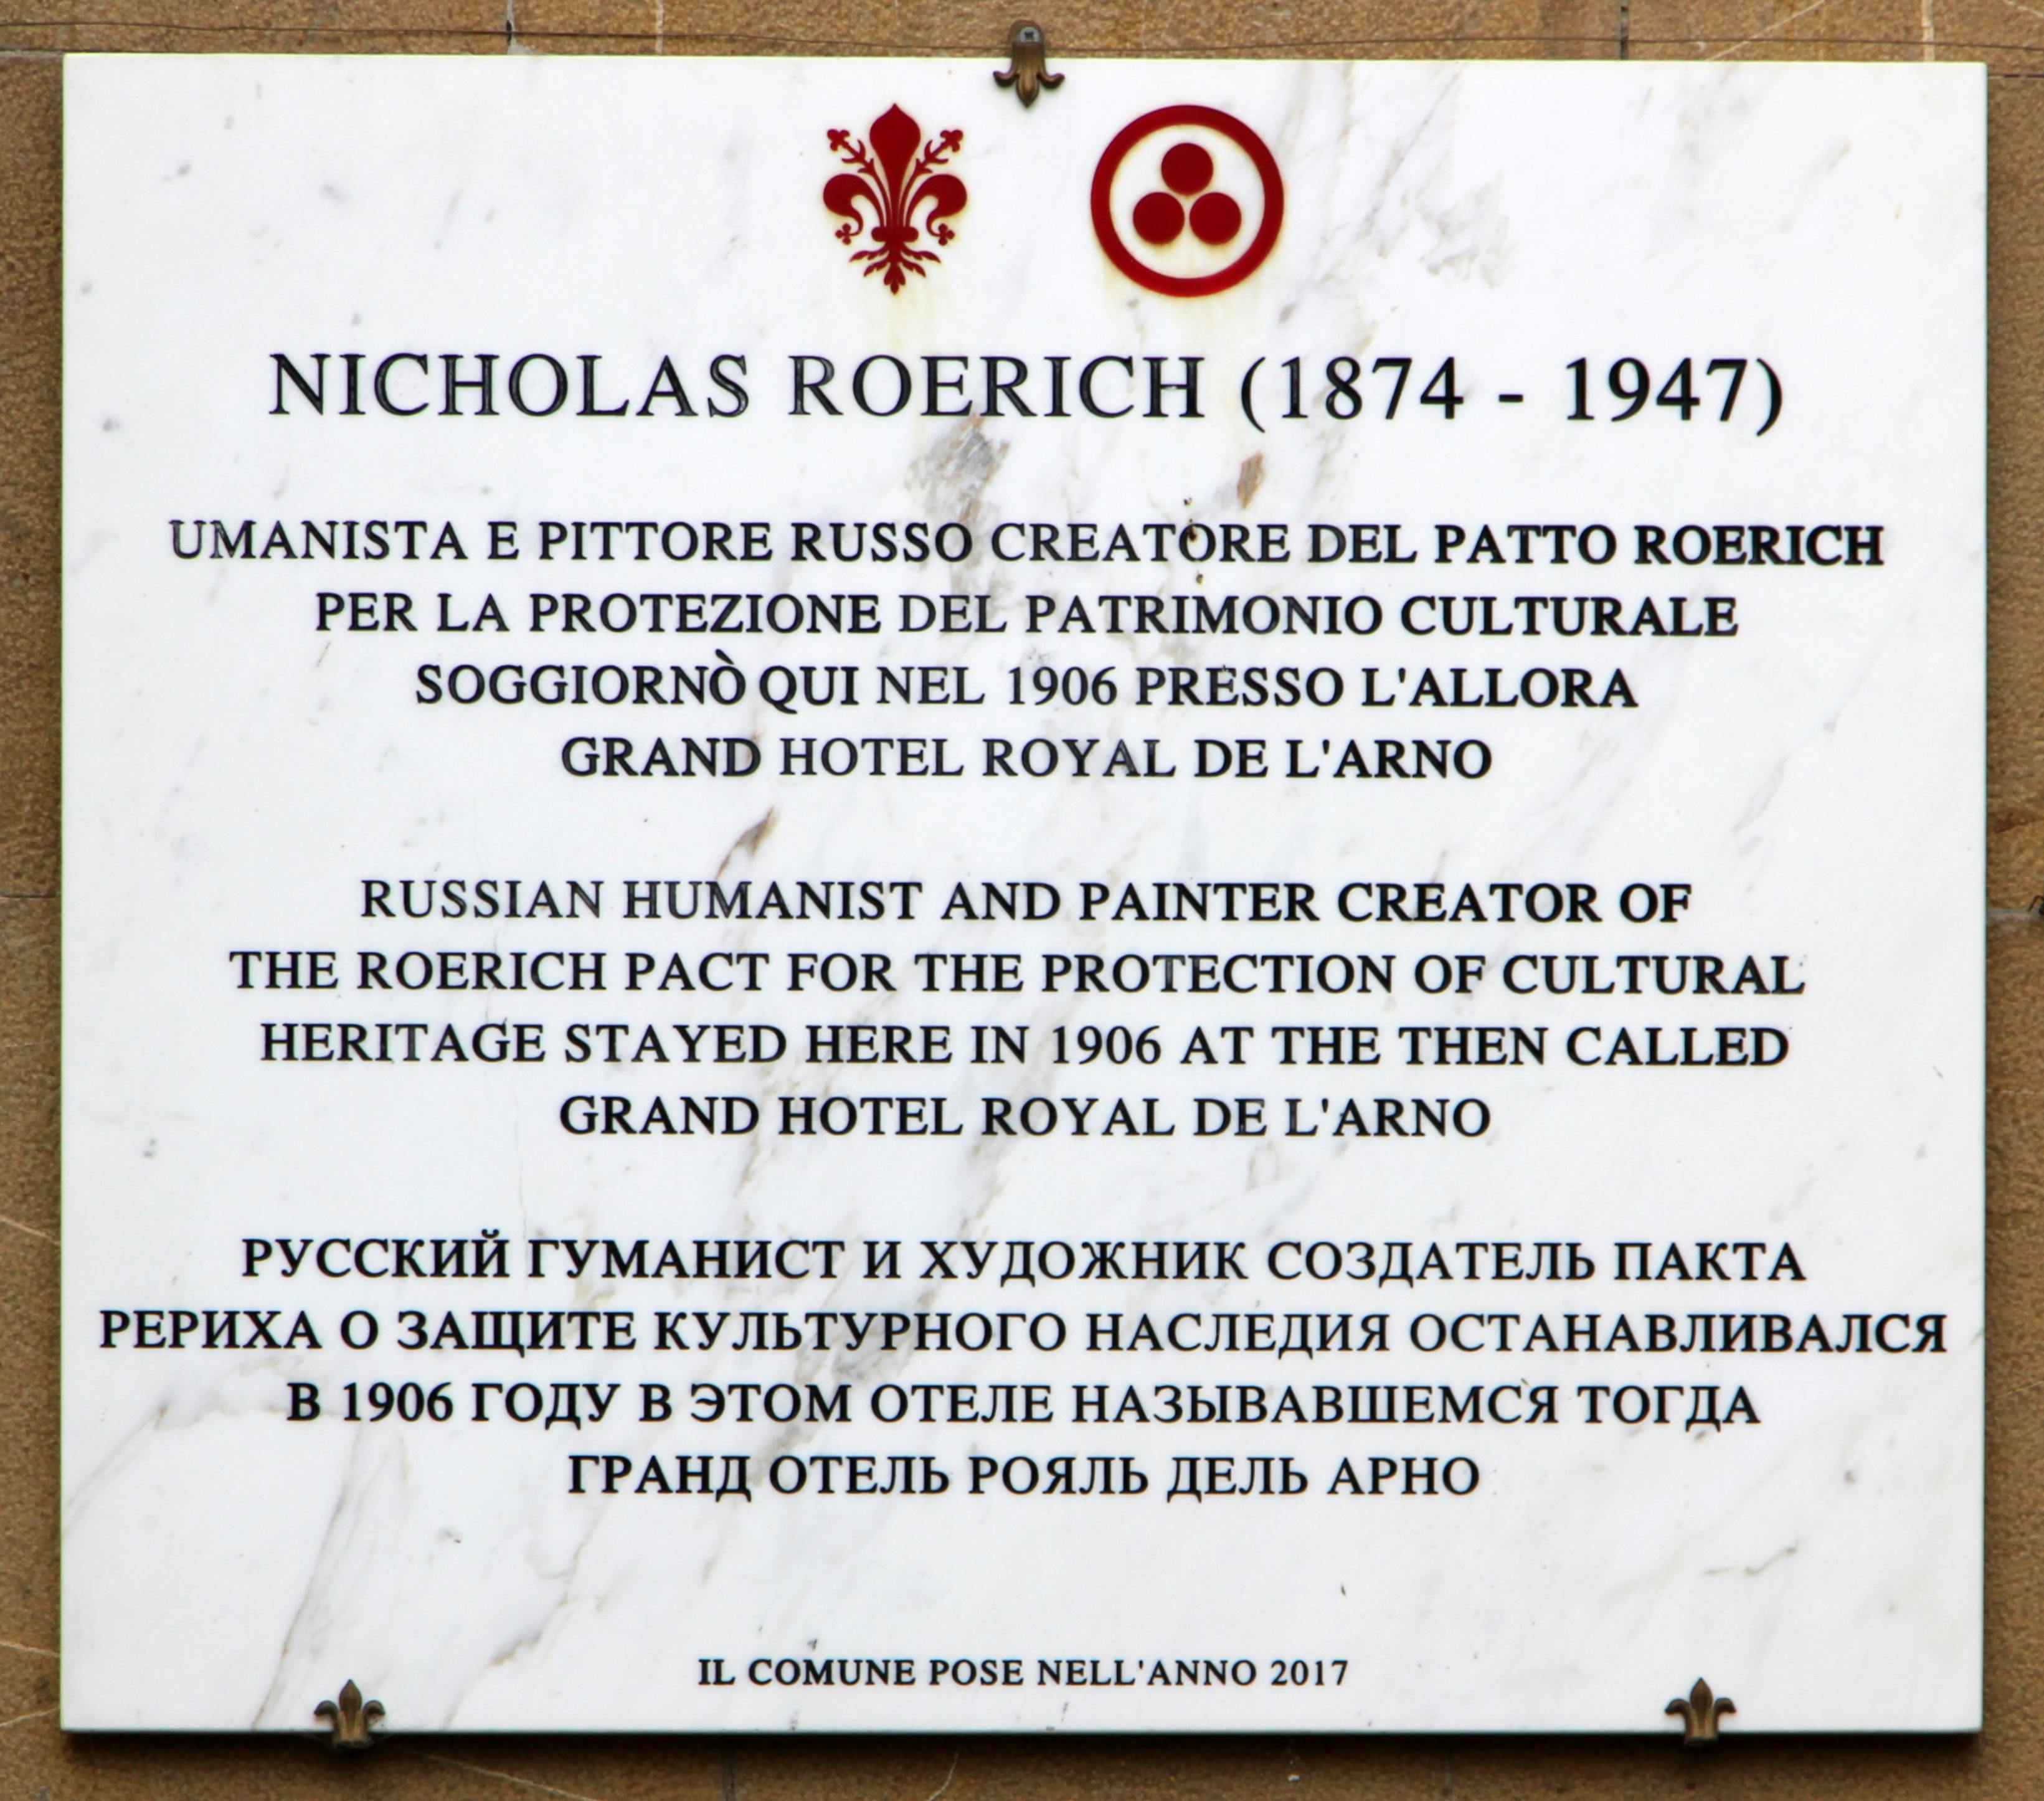 Marble plaque dedicated to Nicolas Roerich and hanging on the Lungarno degli Acciaiuoli in Florence. The plaque reads: Nicholas Roerich (1874 - 1947), Russian humanist and painter creator of the Roerich Pact for the Protection of Cultural Heritage stayed here in 1906 at the then called Grand Hotel Royal de l'Arno.